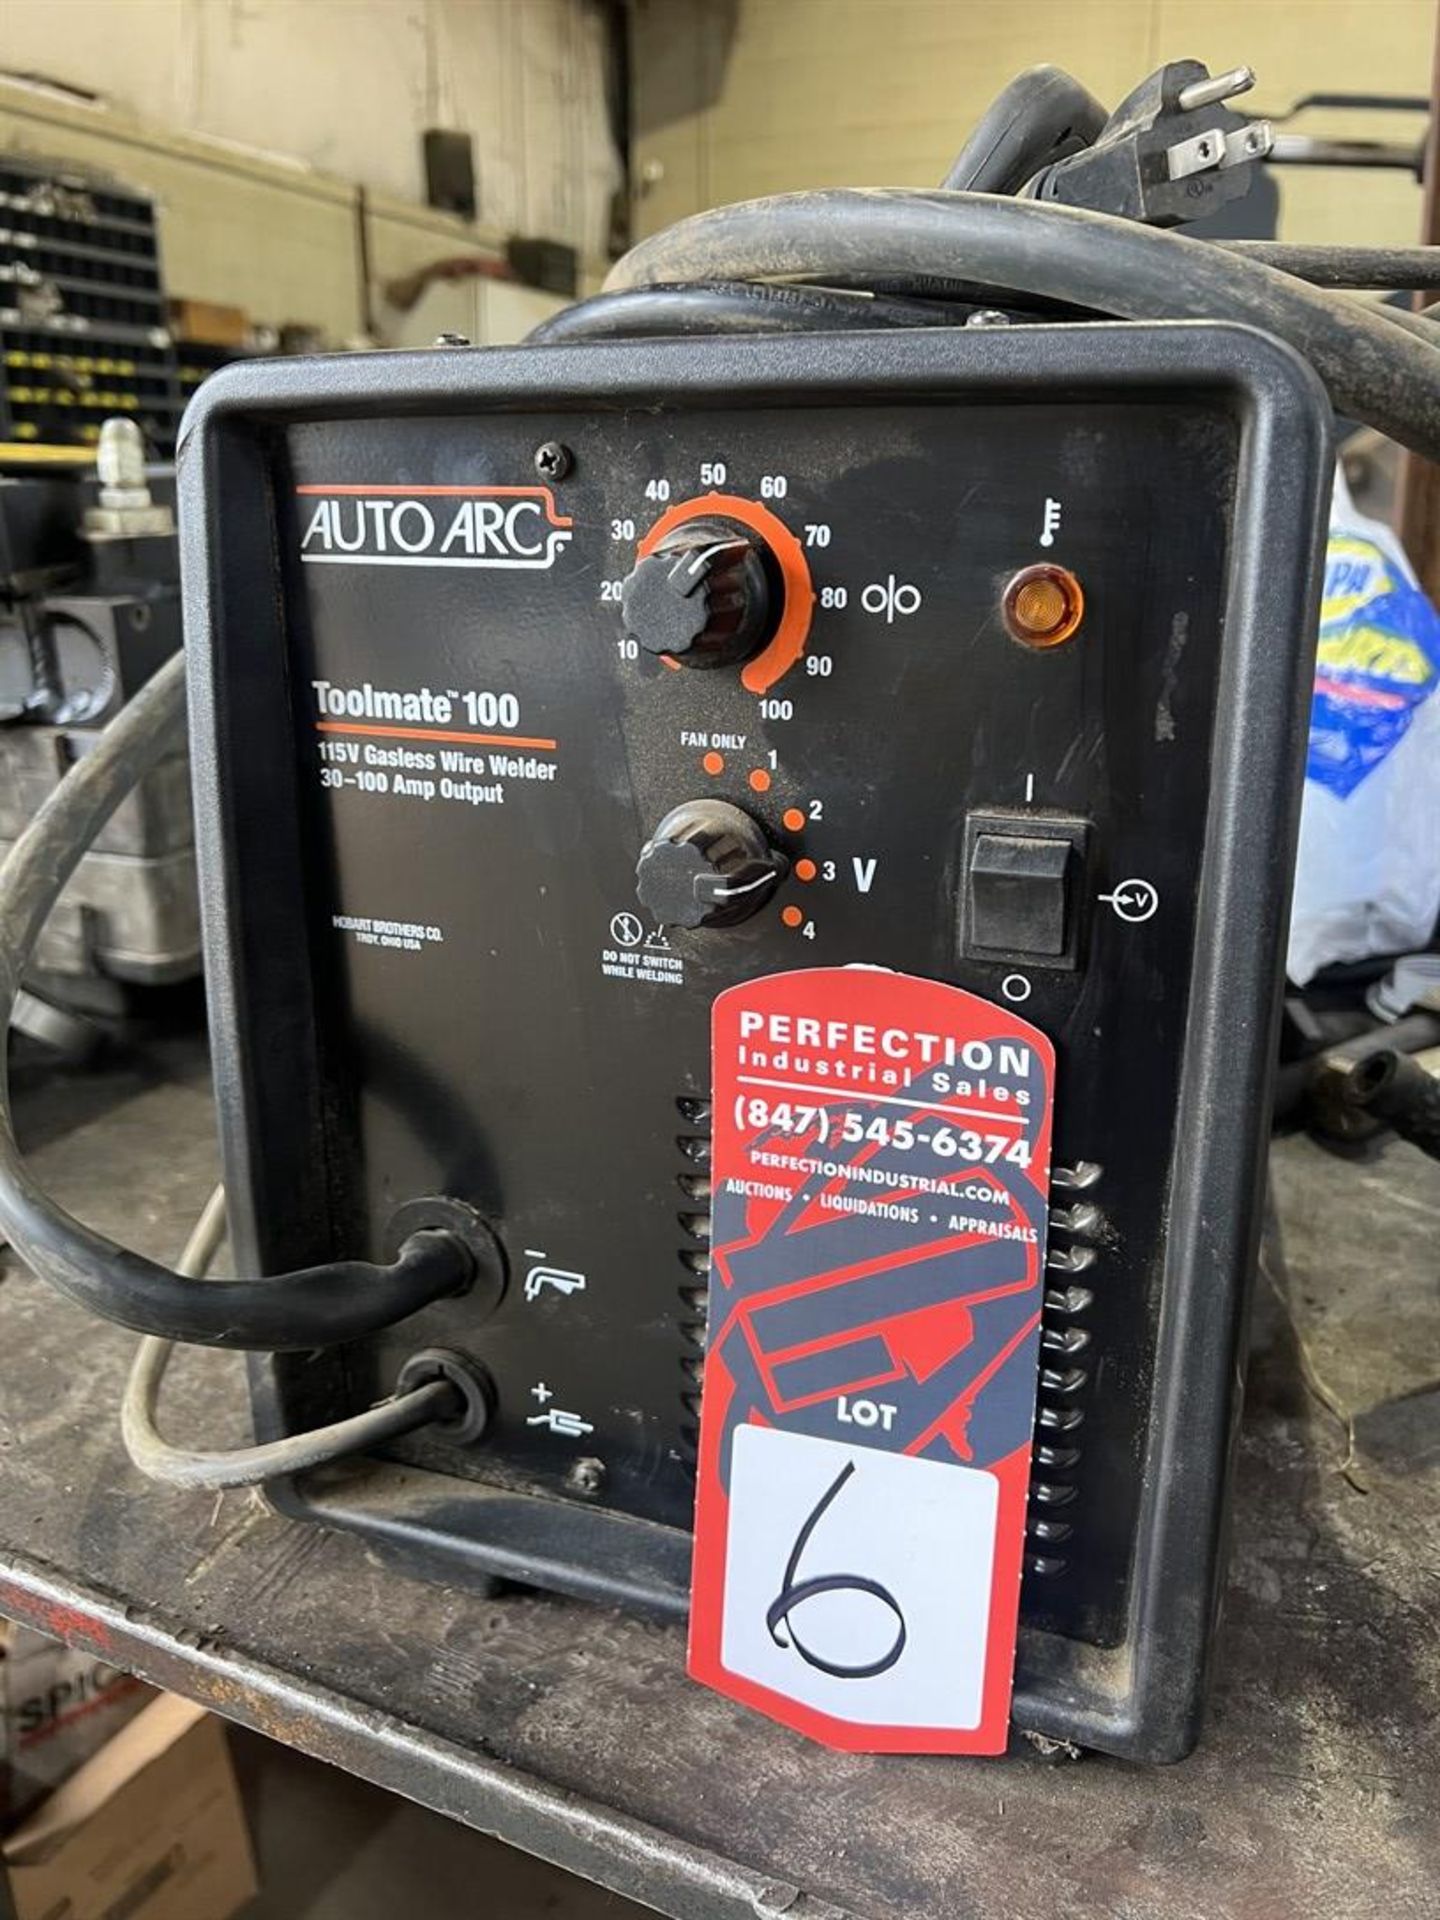 AUTO ARC Toolmate 100 Gasless Wire Welder, s/n 1220151195 - Image 2 of 5